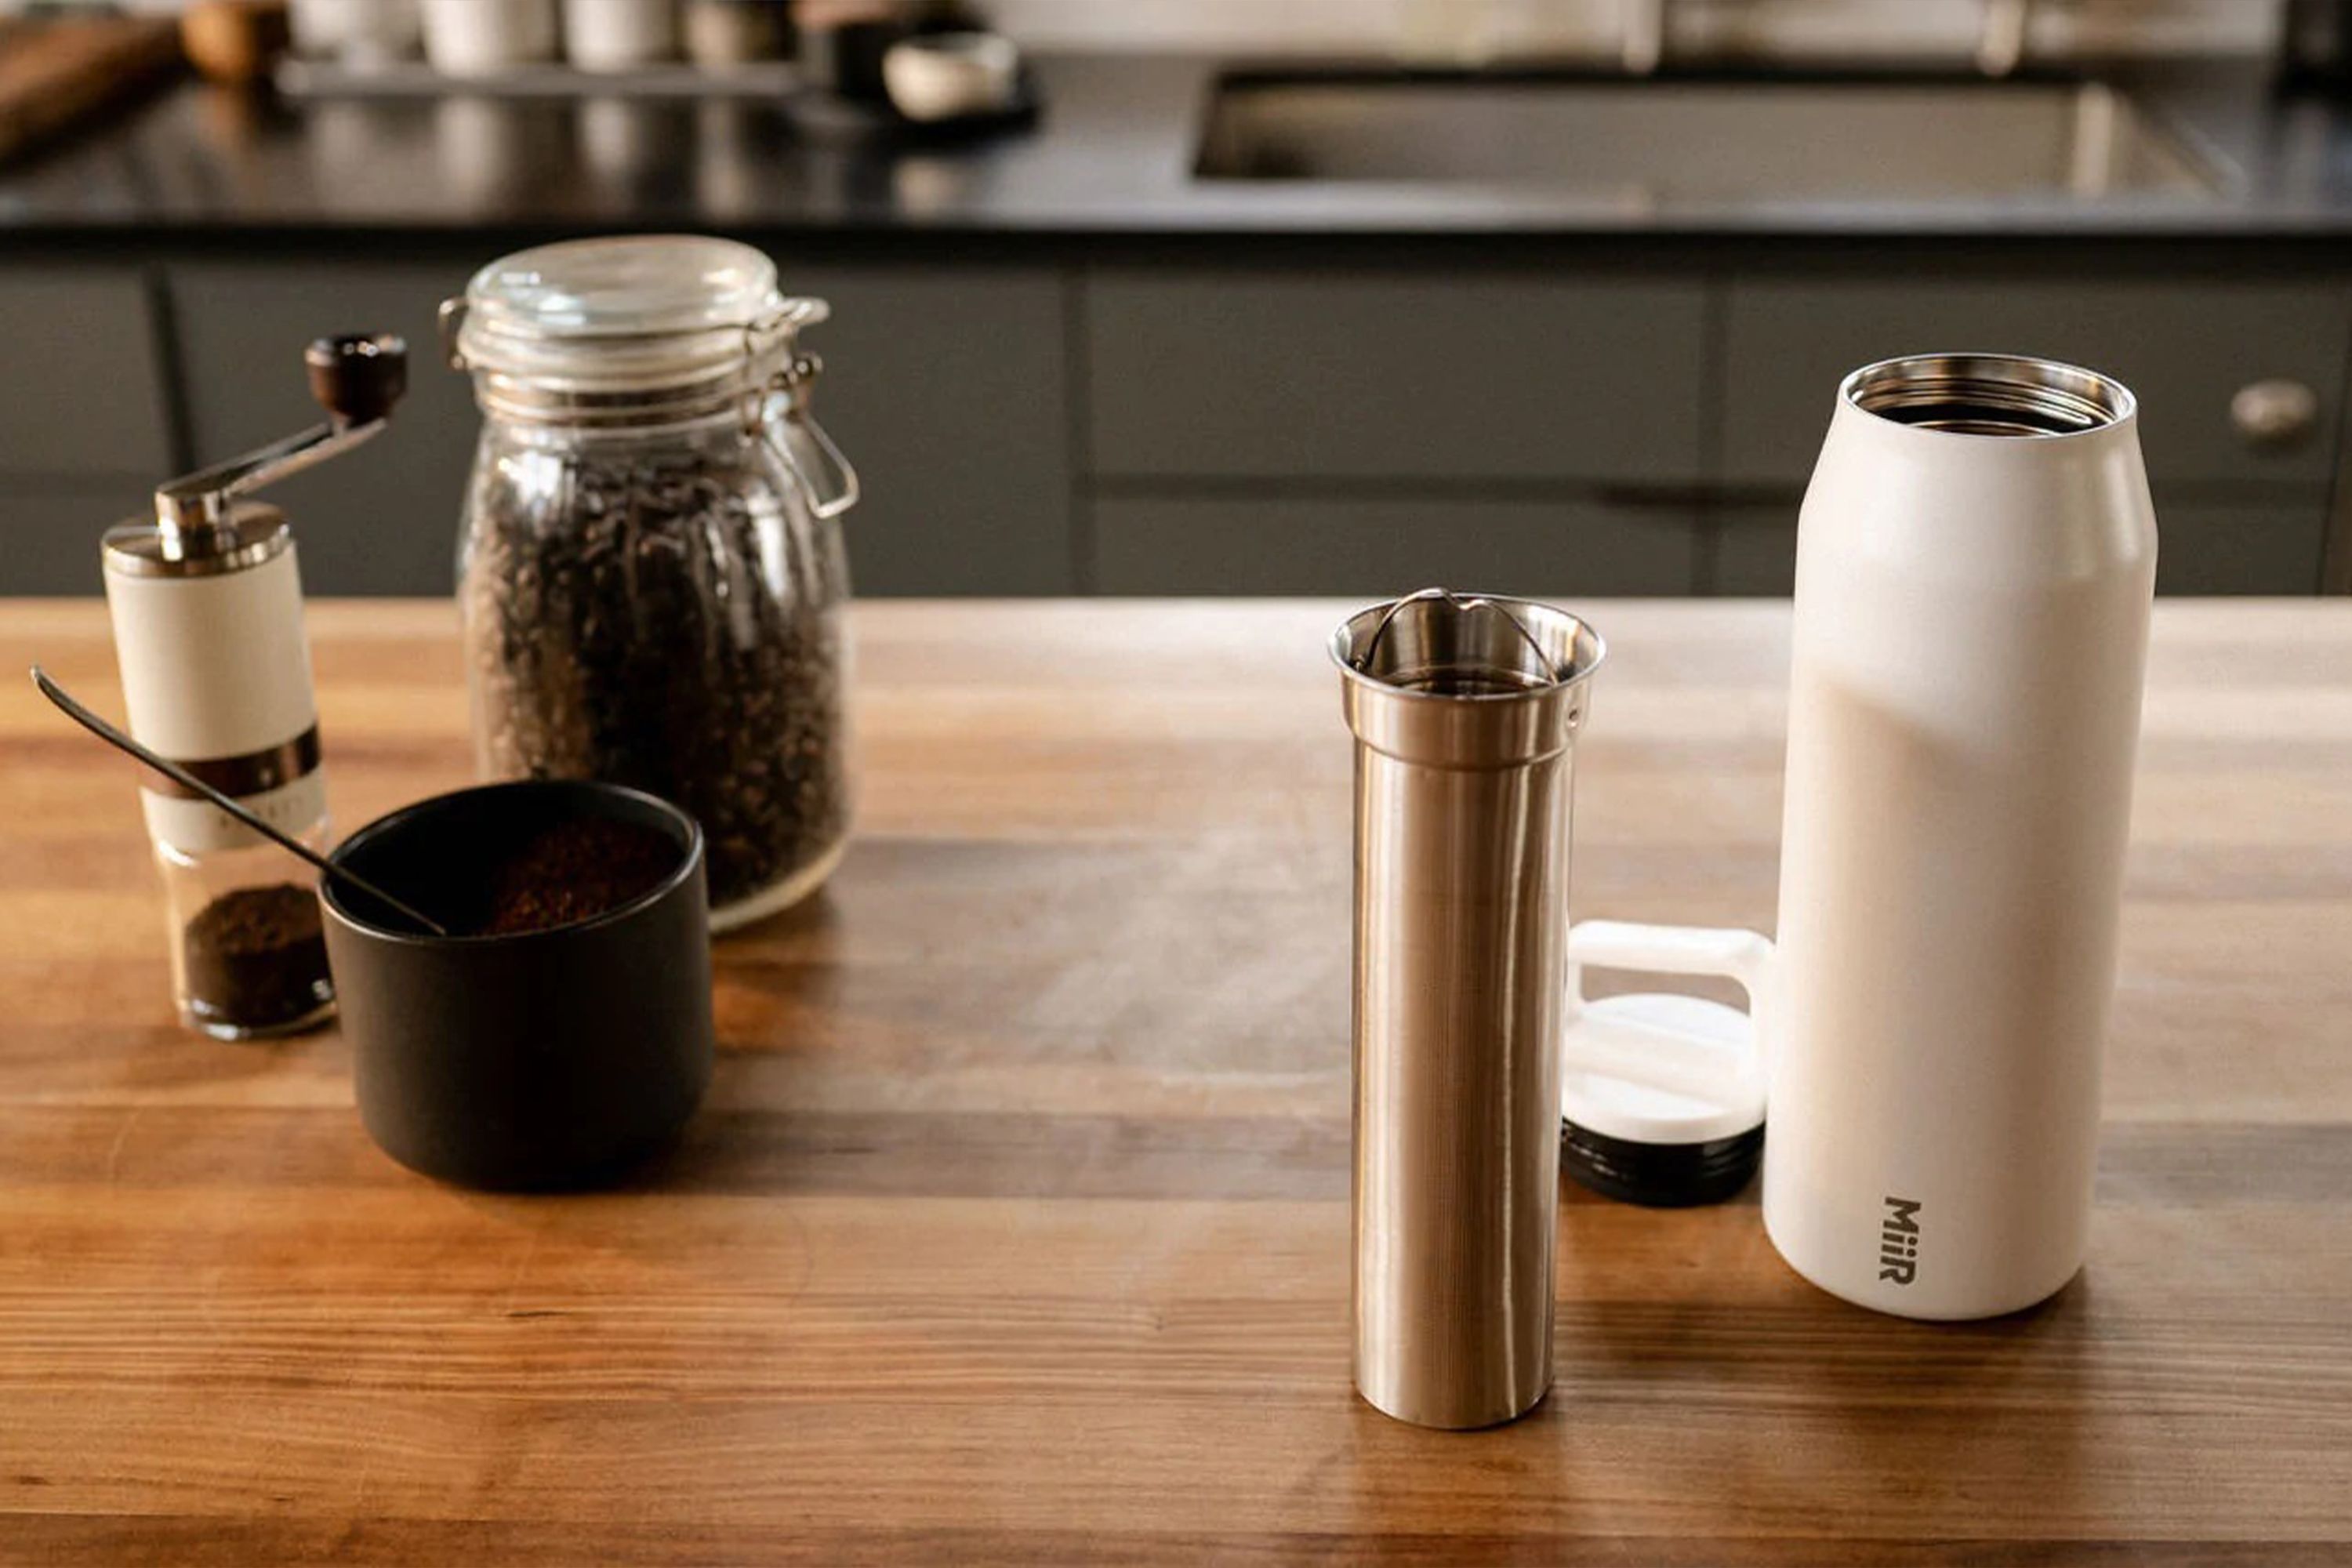 Miir's Cold Brew Filter Turns the Brand's Bottles Into an Iced Coffee System